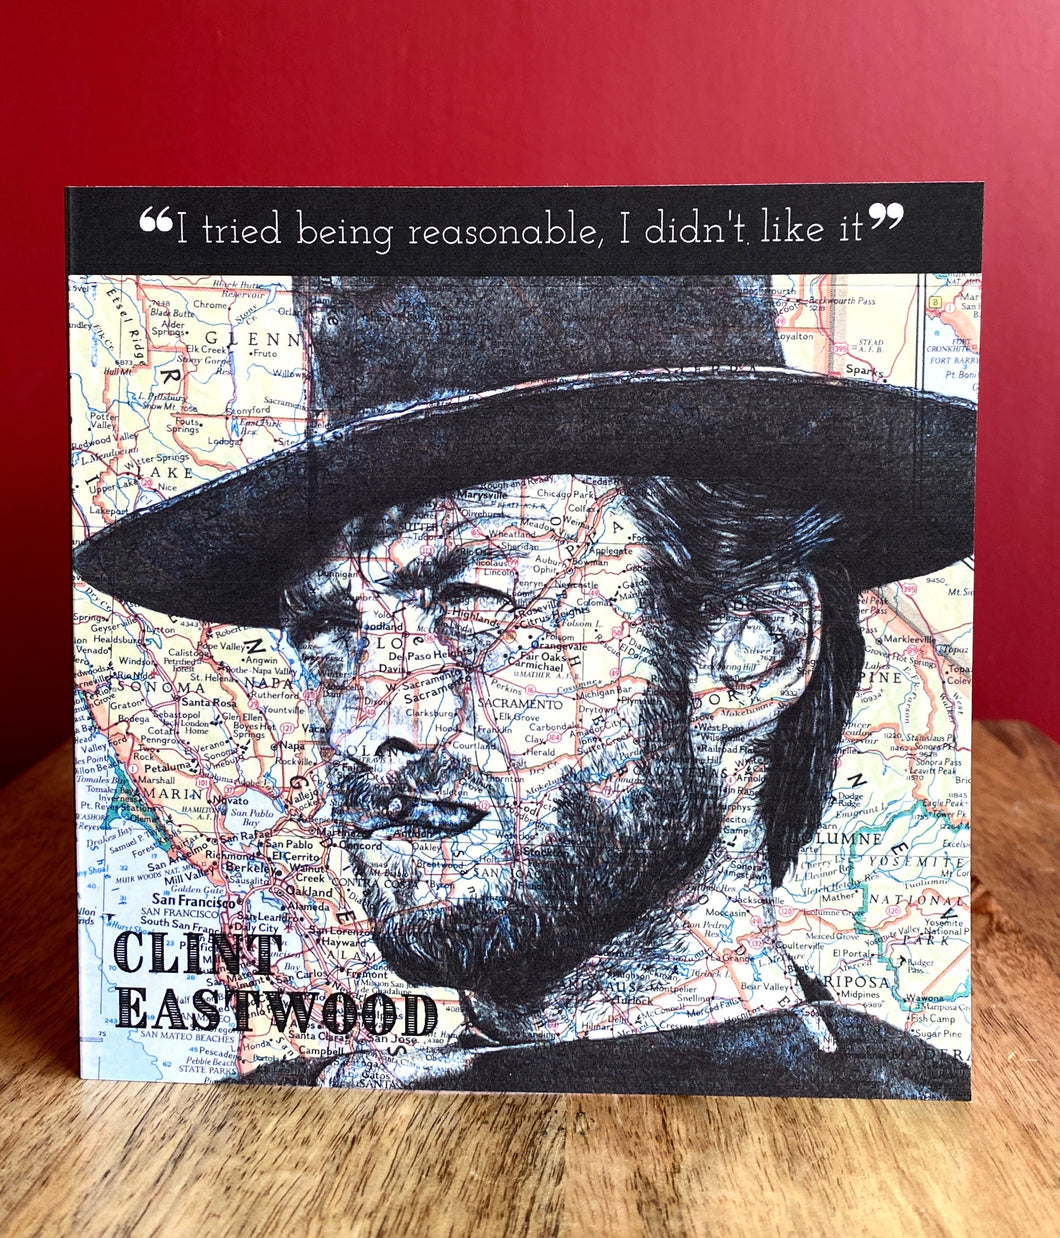 Clint Eastwood Greeting Card. Printed artwork over map of San Fransisco. Blank inside